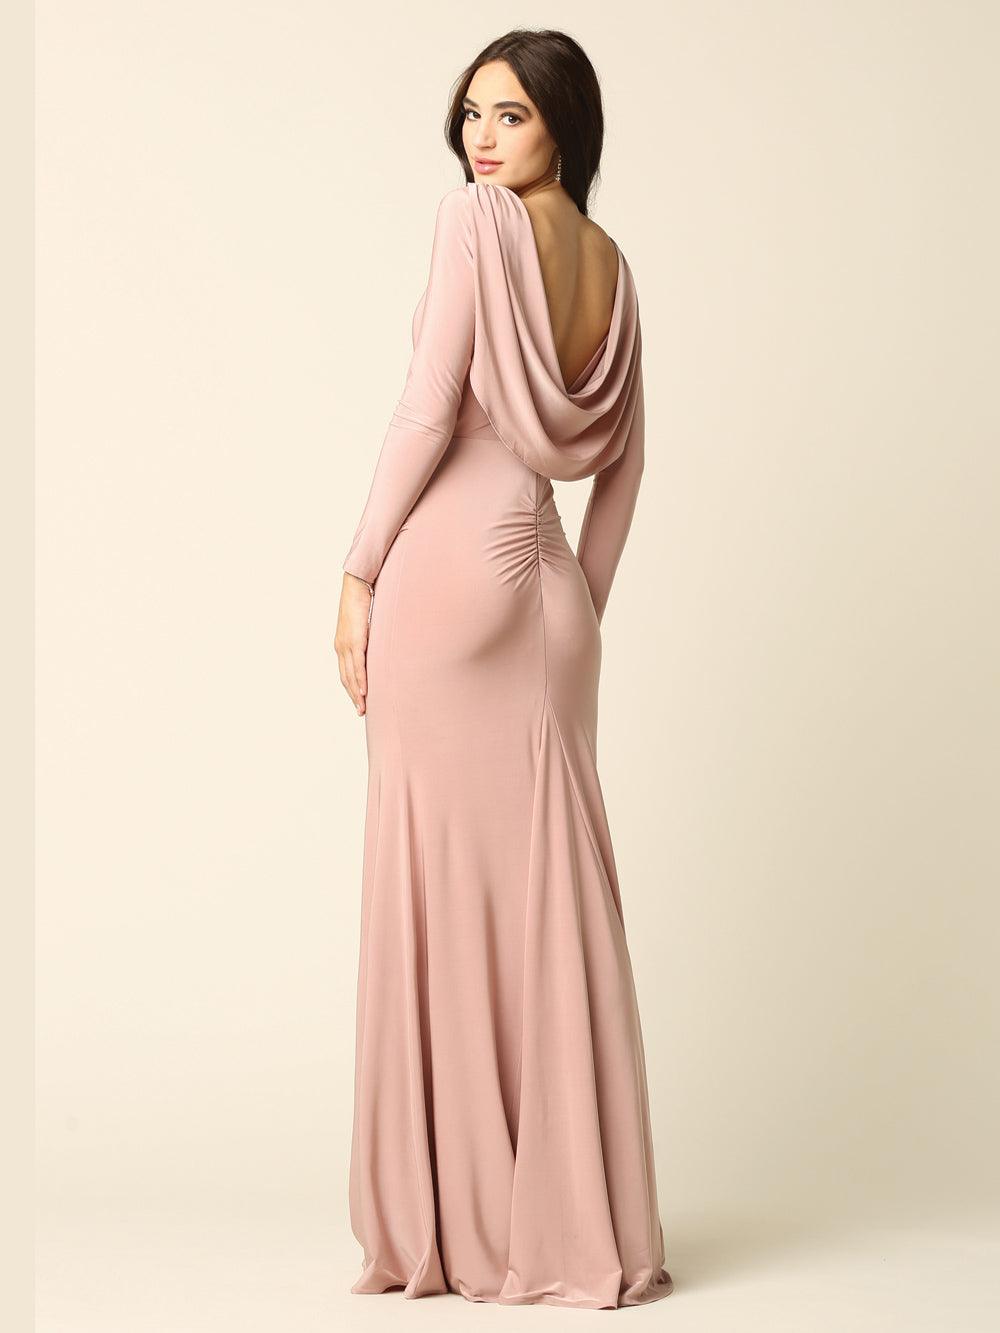 Long Sleeve Mother of the Bride Formal Dress - The Dress Outlet